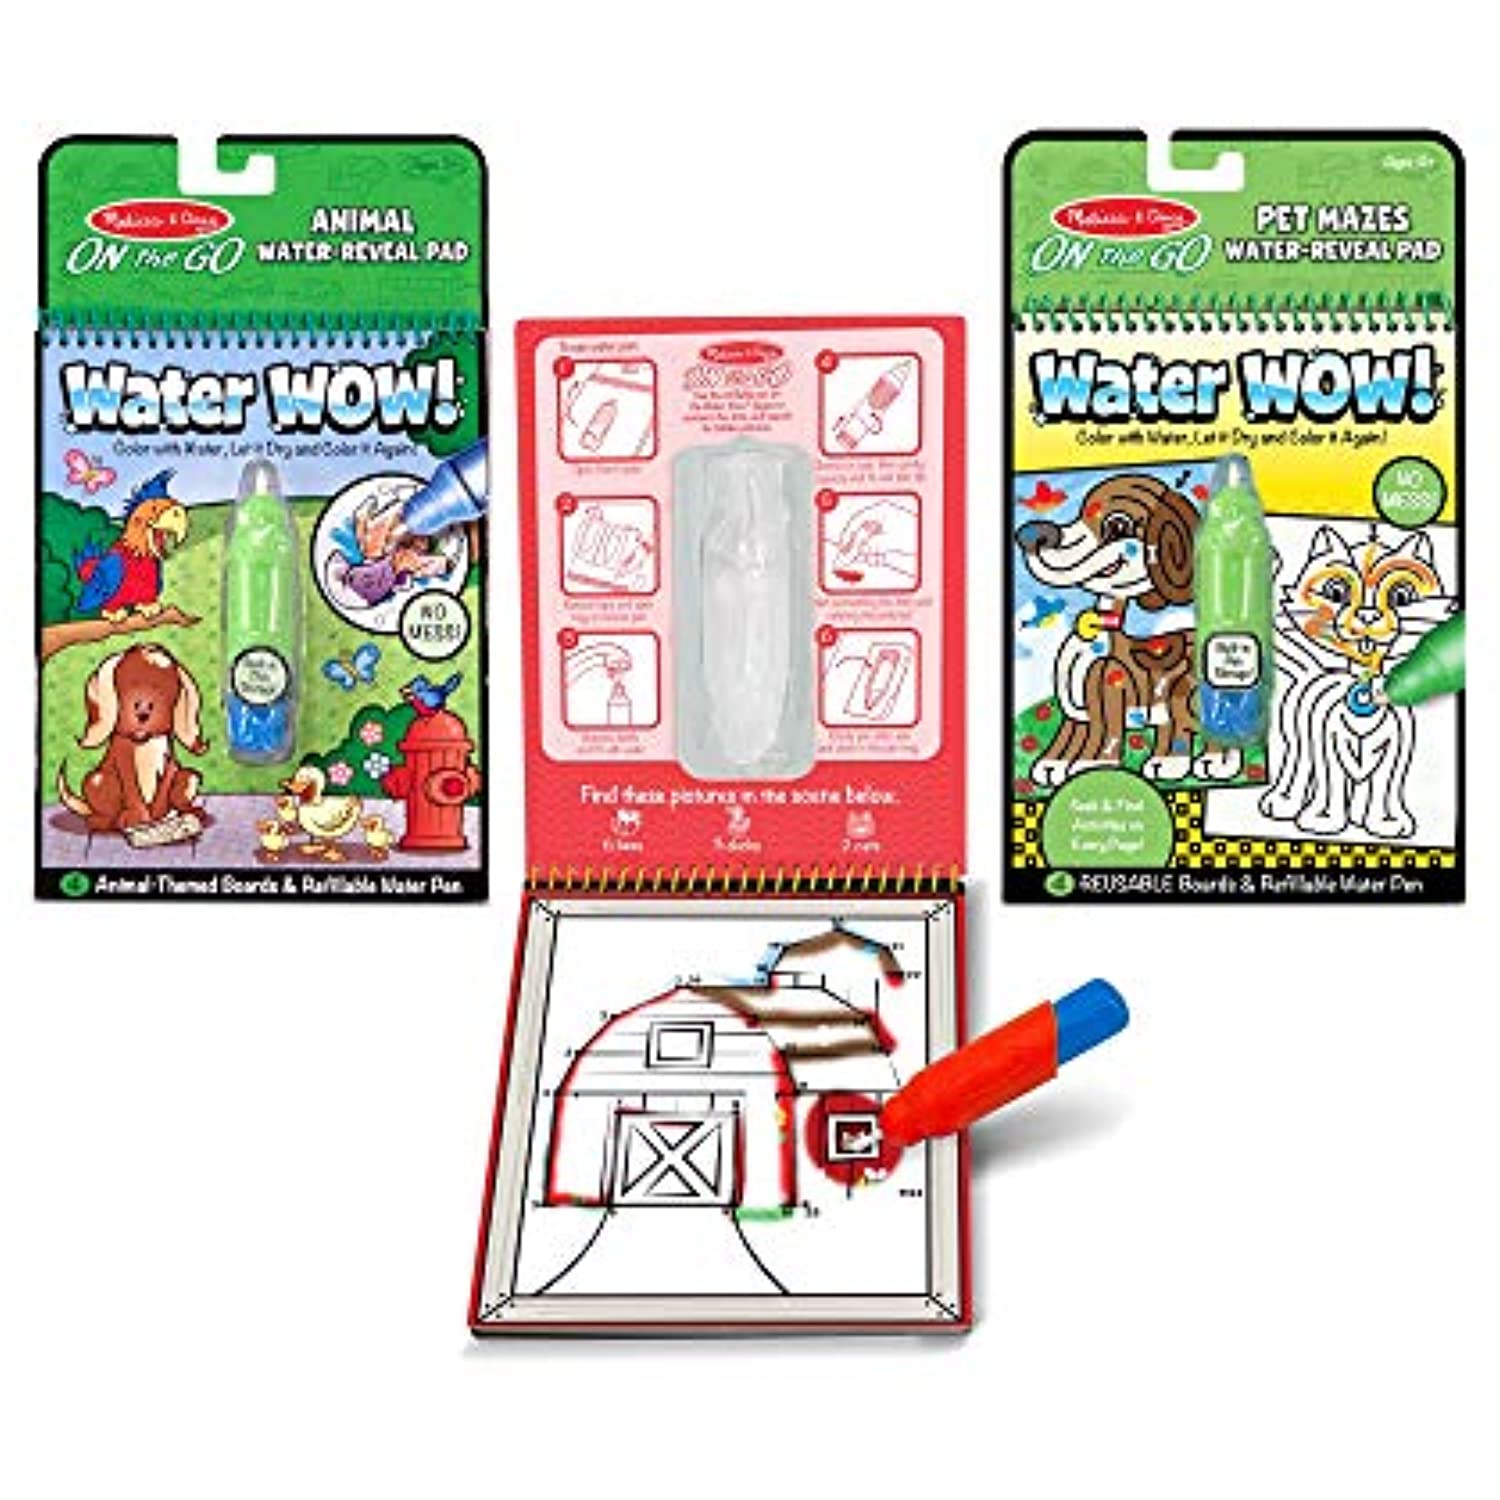 melissa & doug on the go water wow! activity pad 3-pack, animals, farm, pet  mazes (reusable water reveal coloring books) 